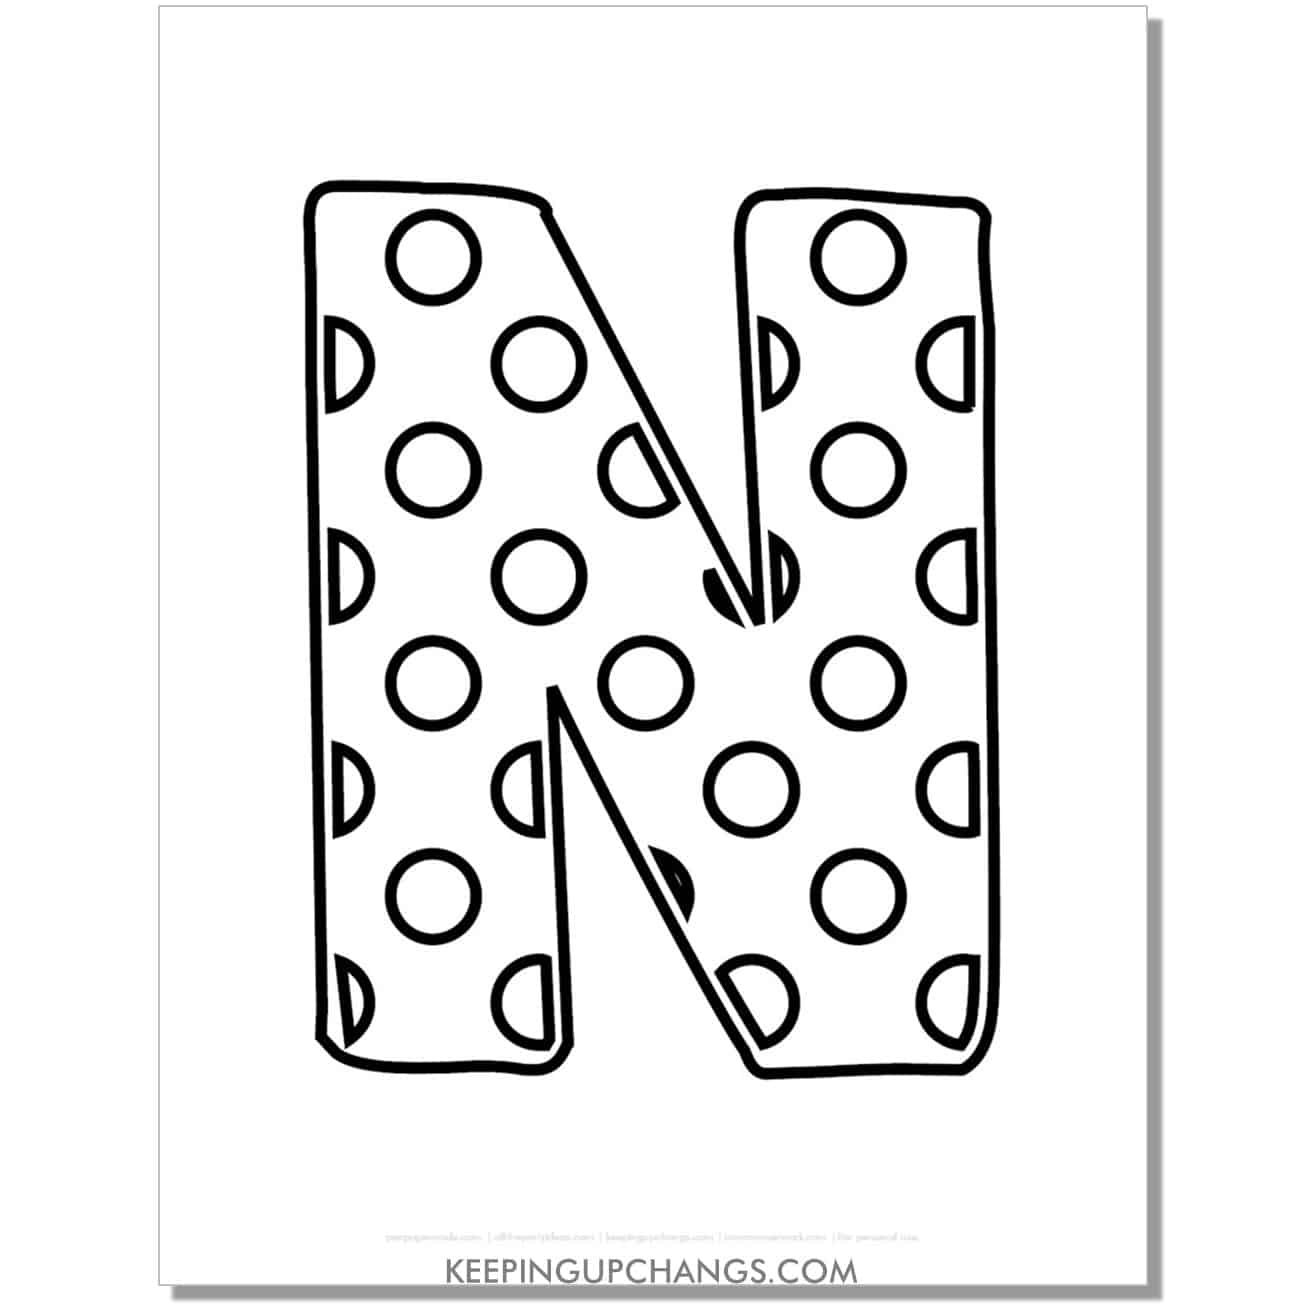 free alphabet letter n coloring page with polka dots for toddlers, preschool, kindergarten.